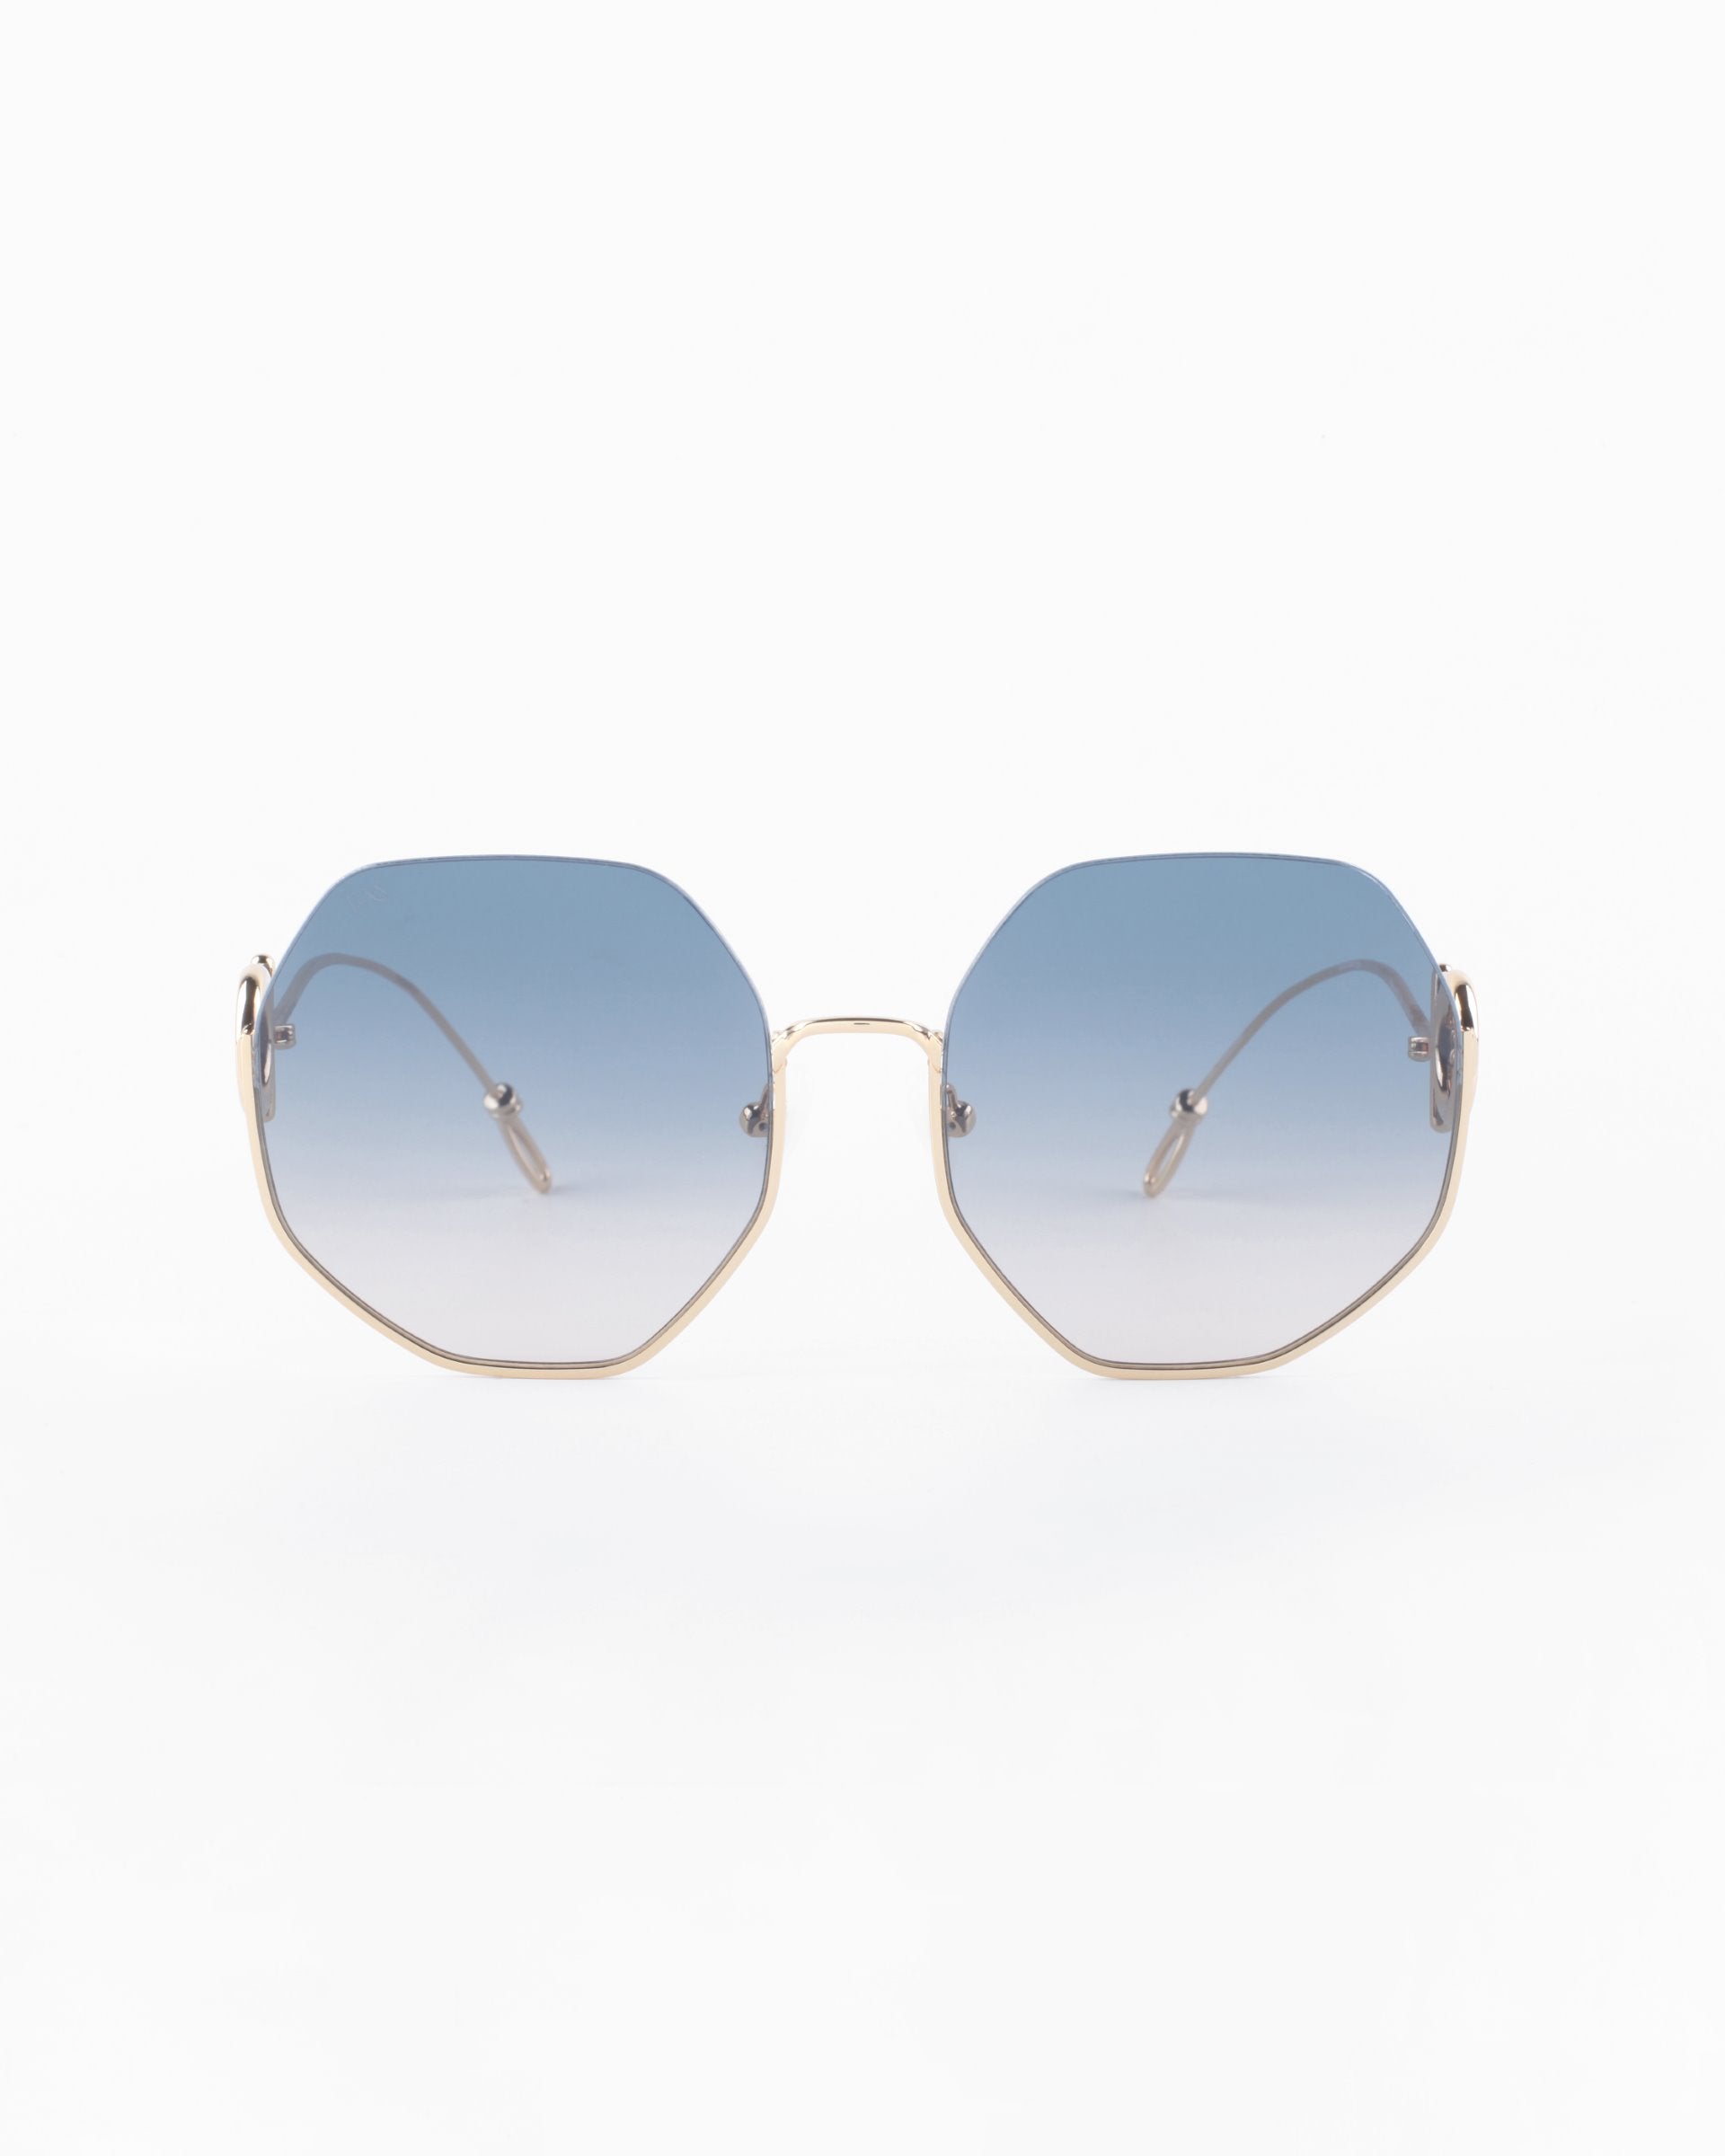 Front view of Palace sunglasses by For Art&#39;s Sake® with gradient blue lenses and thin 18-karat gold-plated frames. The arms of the sunglasses are also gold, with white earpieces. These UVA &amp; UVB-protected sunglasses are Limited Edition. The image has a clean white background.